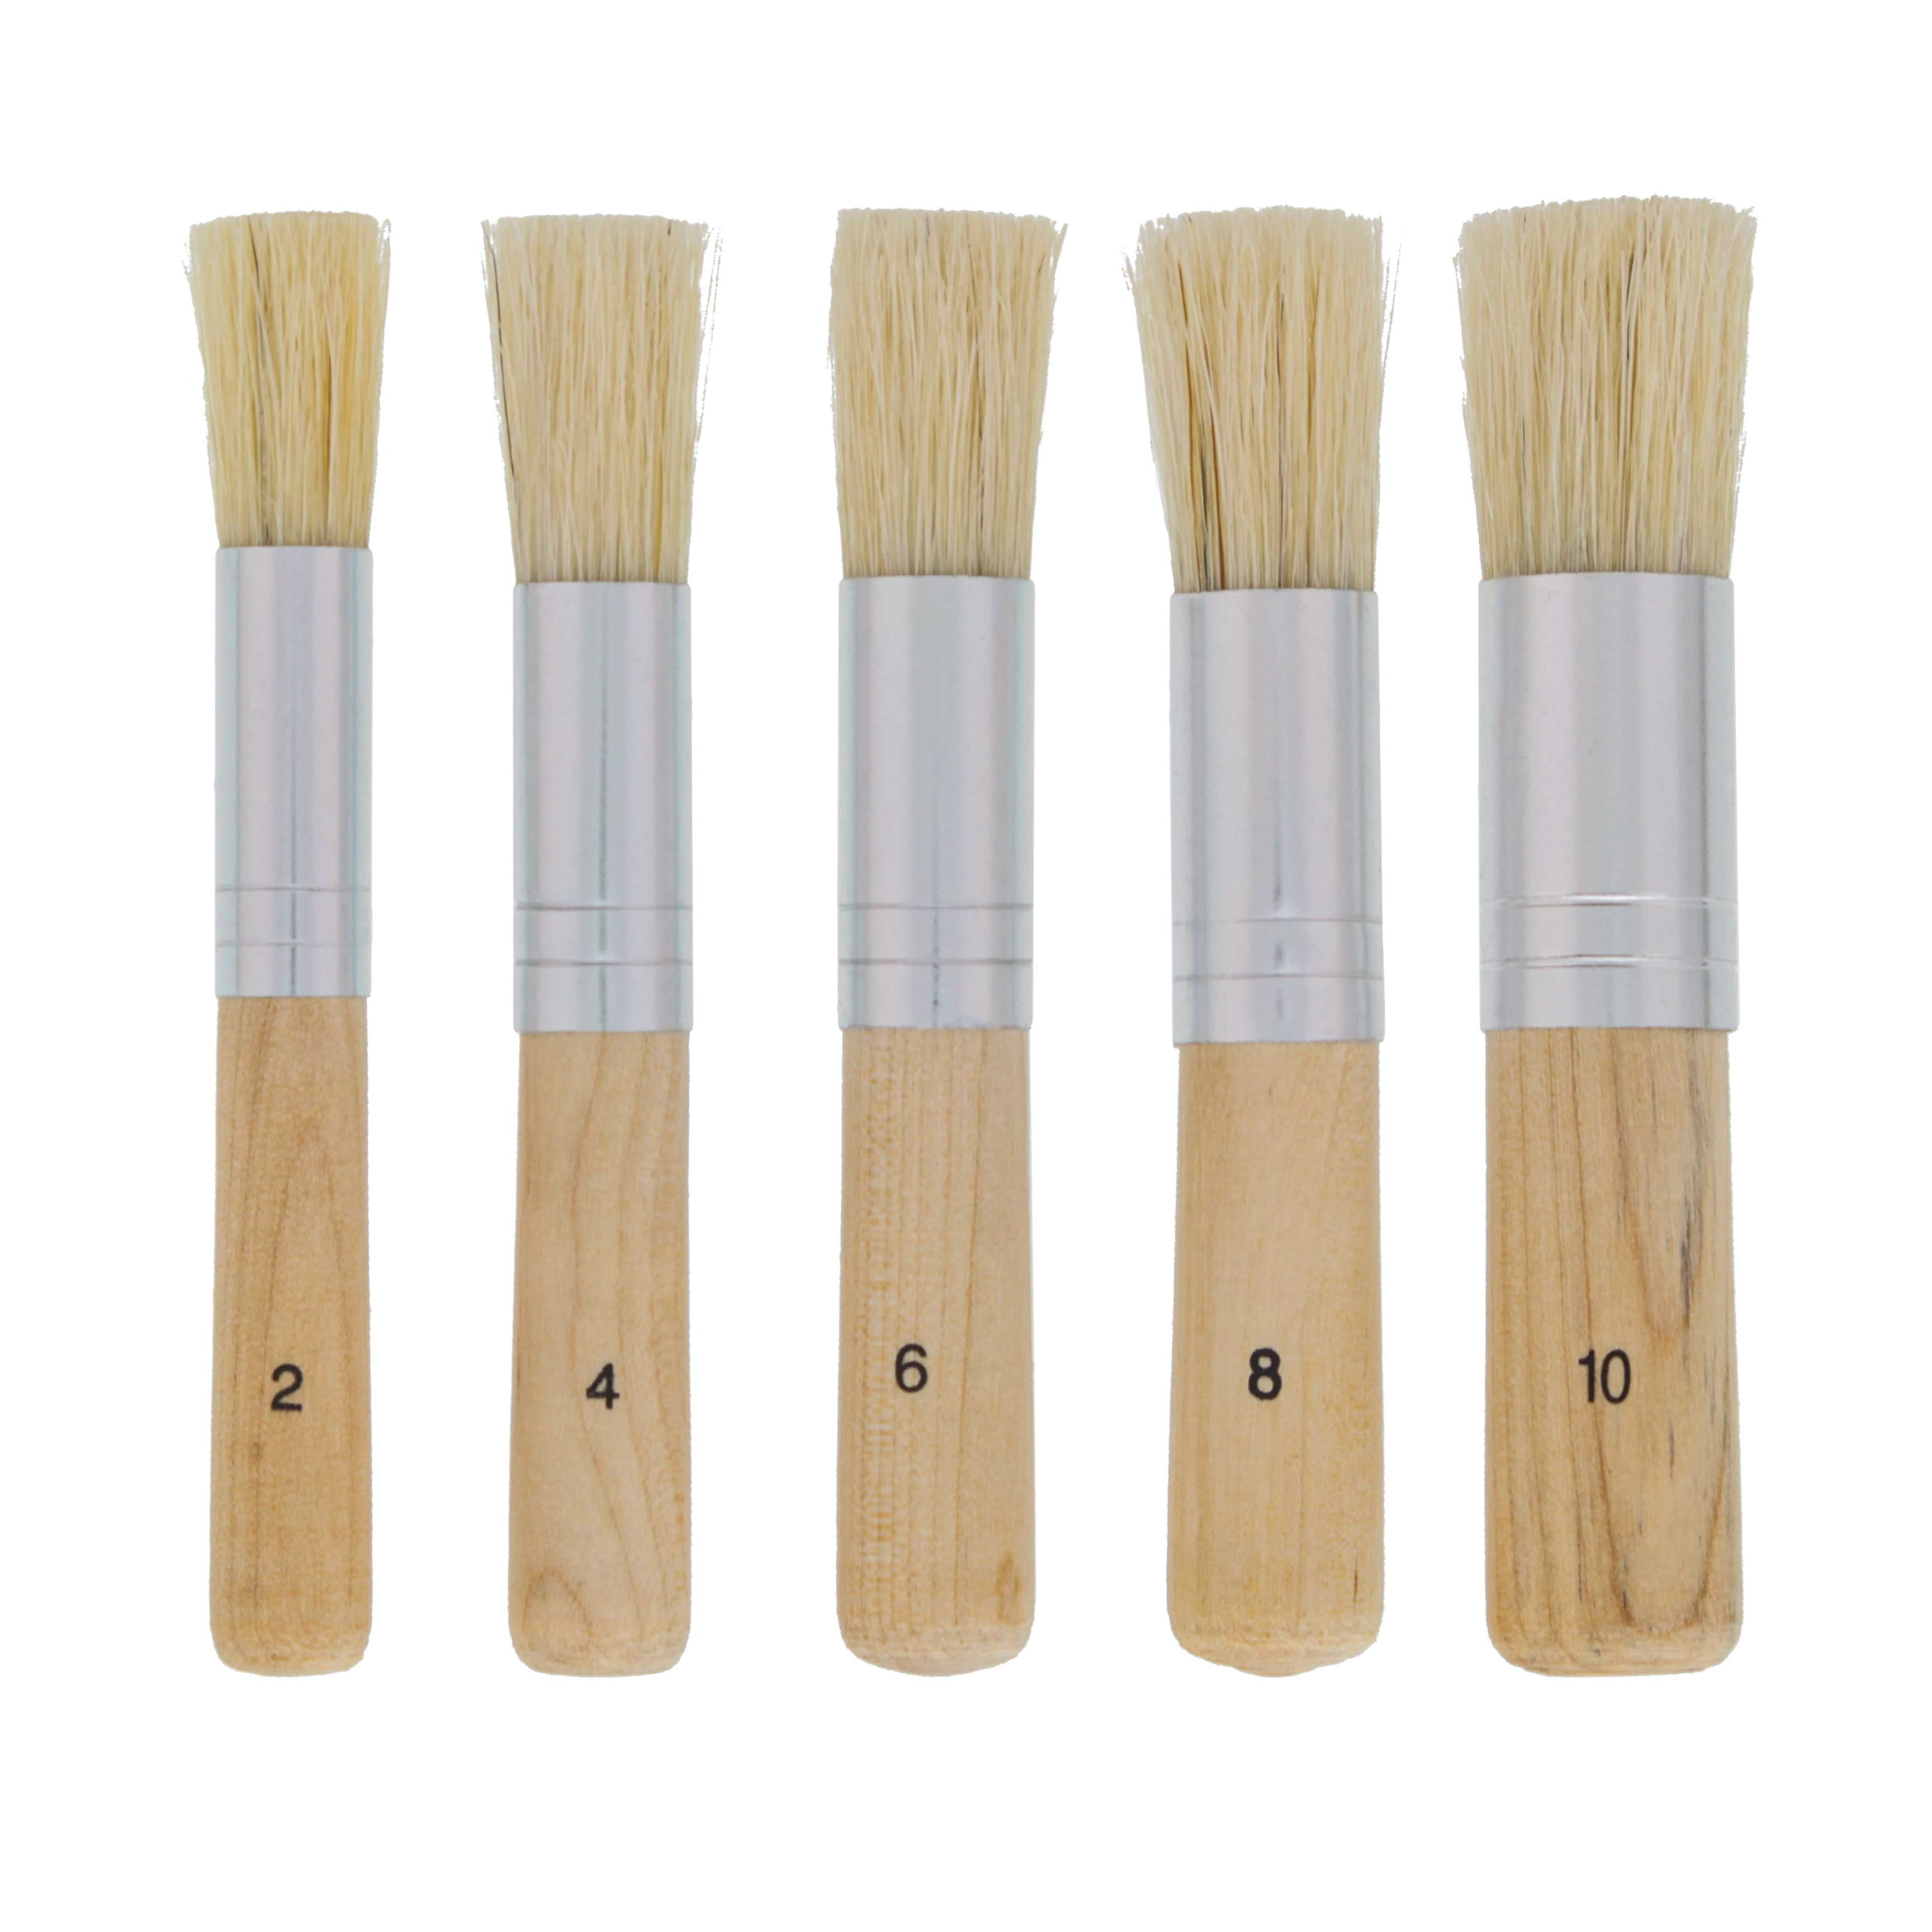 Paint Brushes Brush Set 4 4 Pack Stains & Wall Painting Acrylic - Good qulaity with Wooden Handle Synthetic Bristles Can Be Used with Varnishes